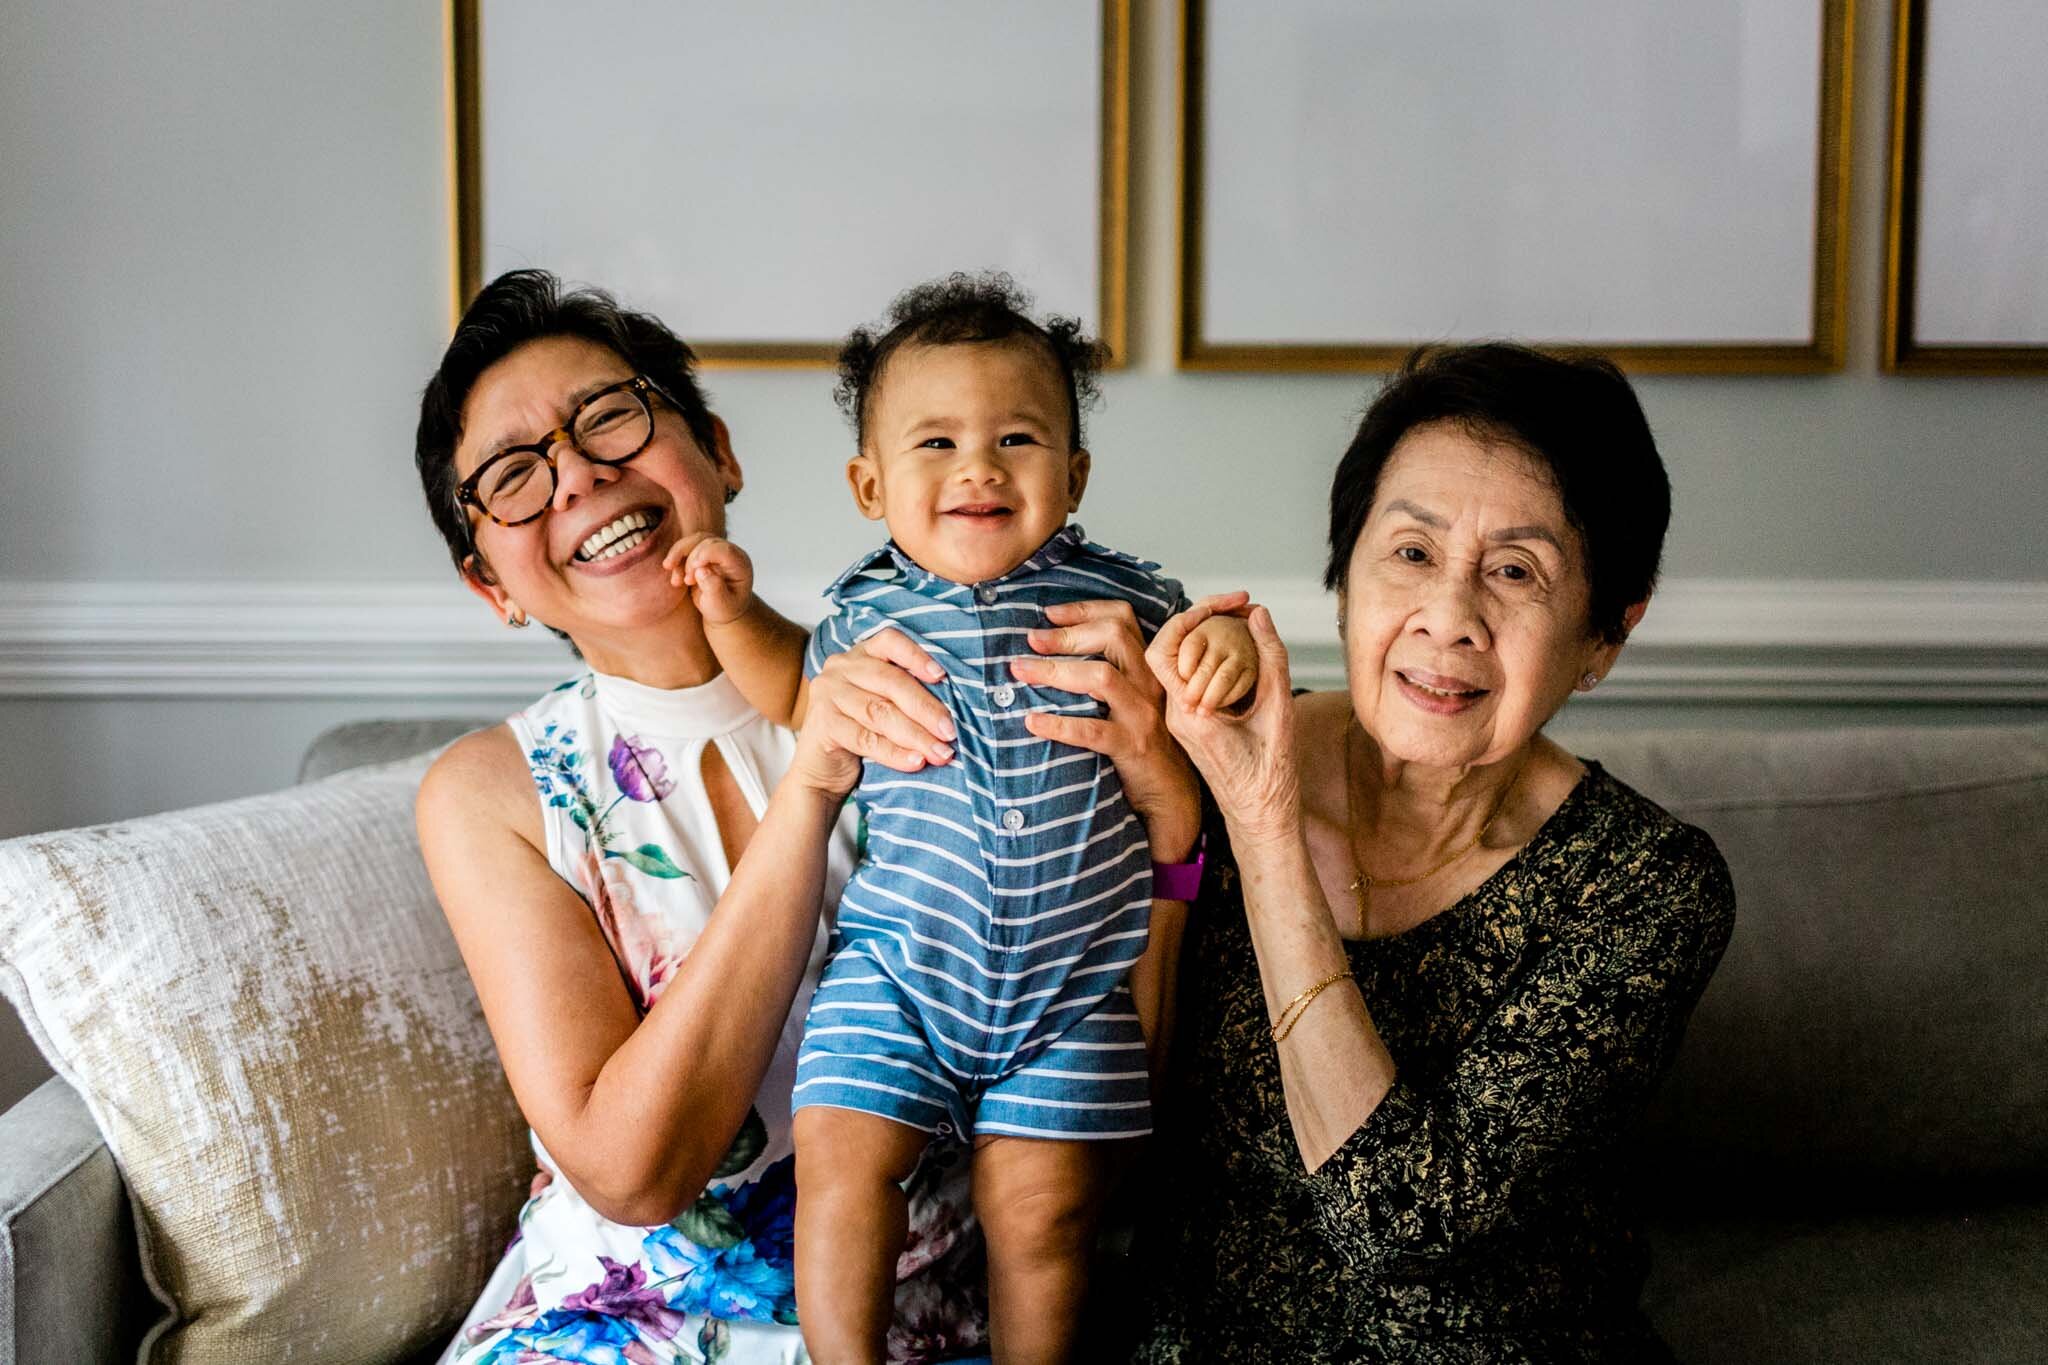 Raleigh Family Photographer | By G. Lin Photography | Baby boy smiling and being held by two women